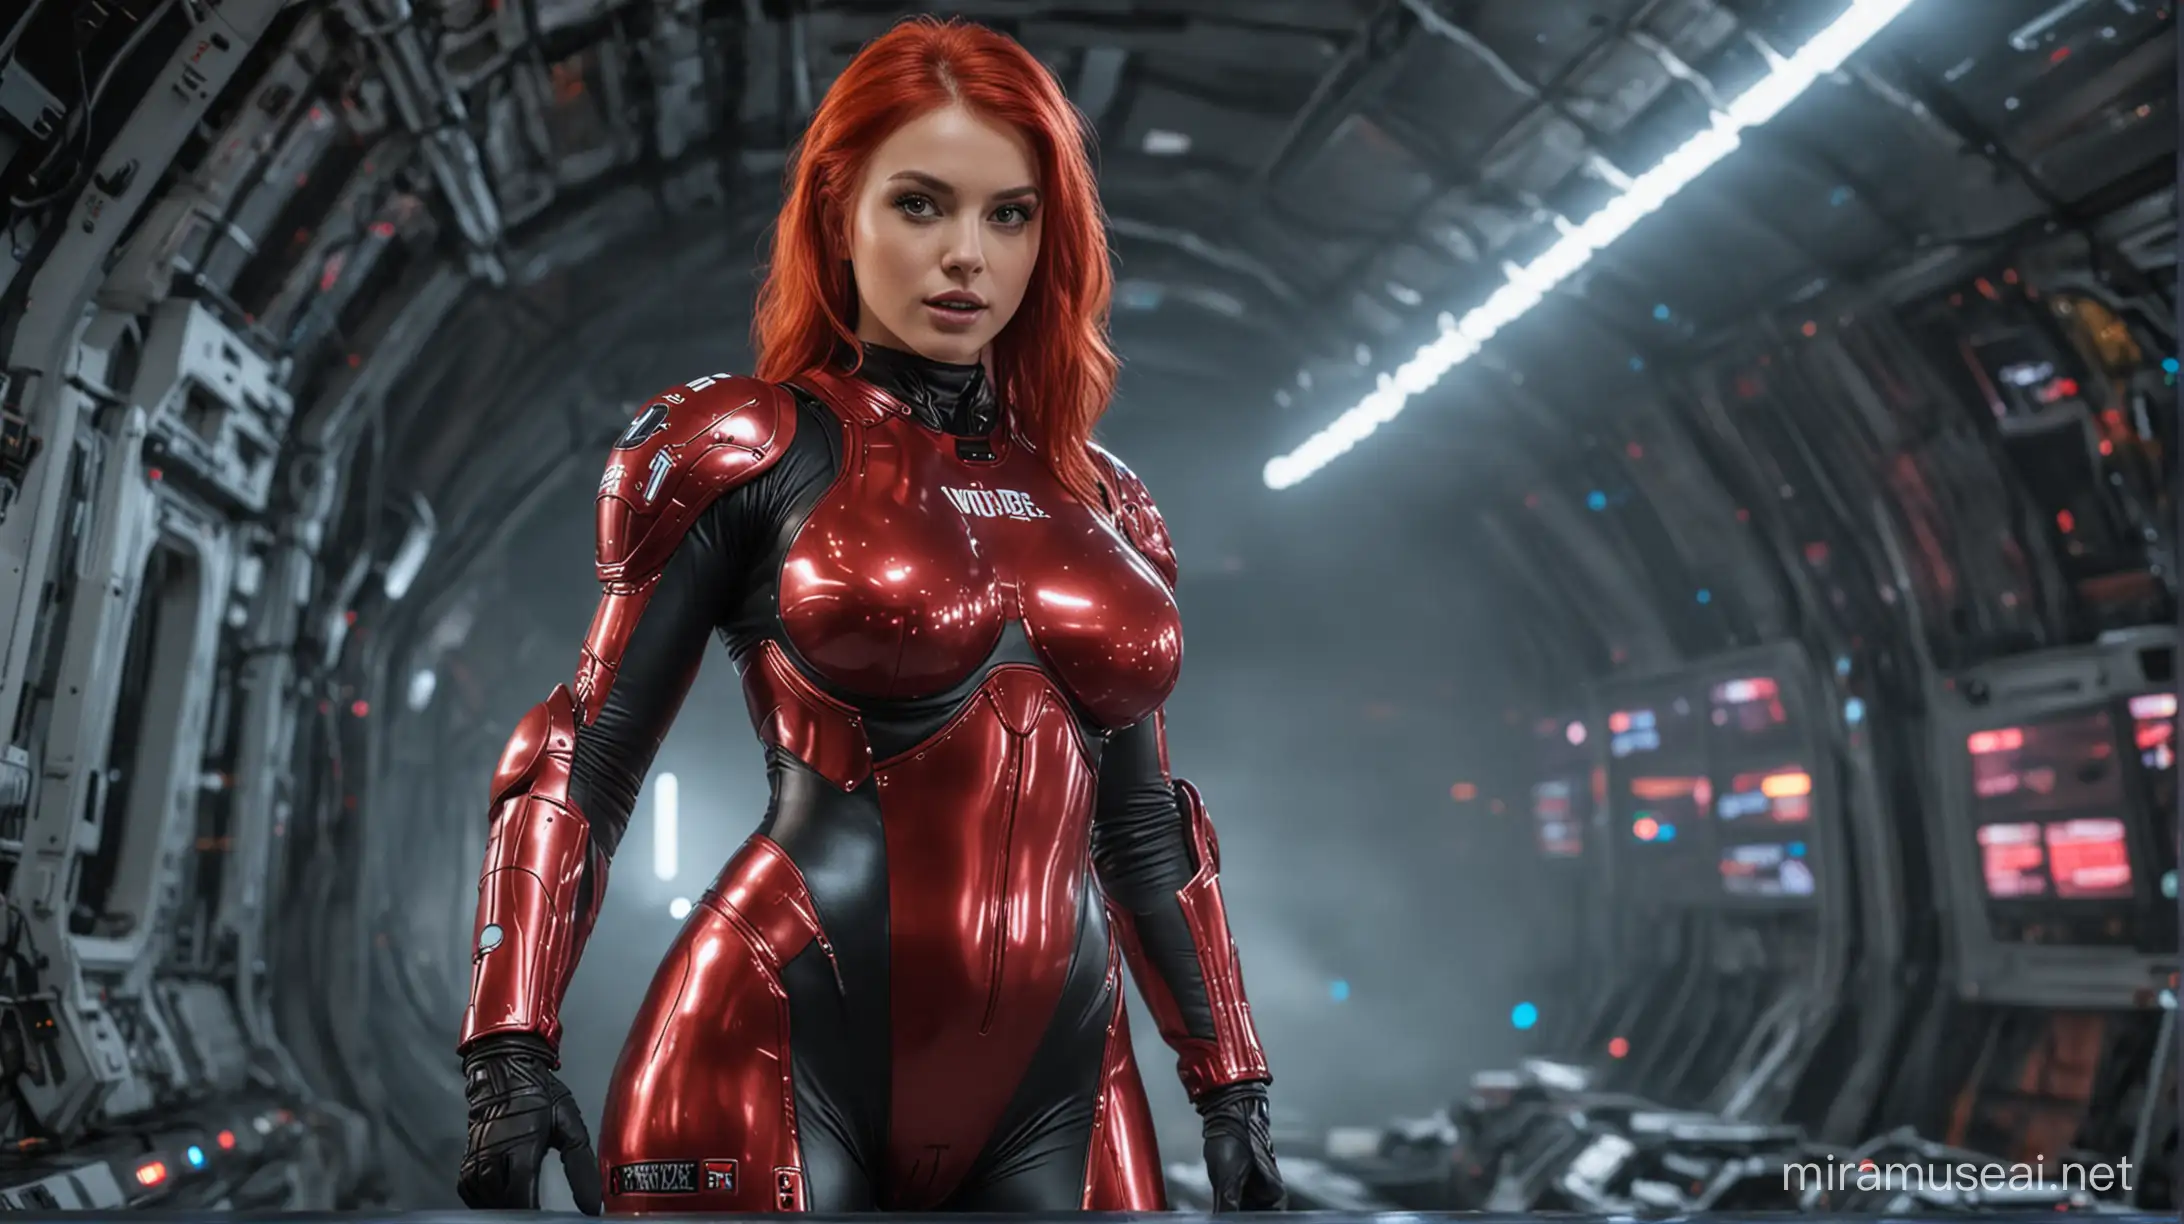 colorful youtube preview, background text BEST STREAM, sexy slim girl, extra large breast, red hairs, tight spacesuit, glowing spacesuit, armored spacesuit, space, 